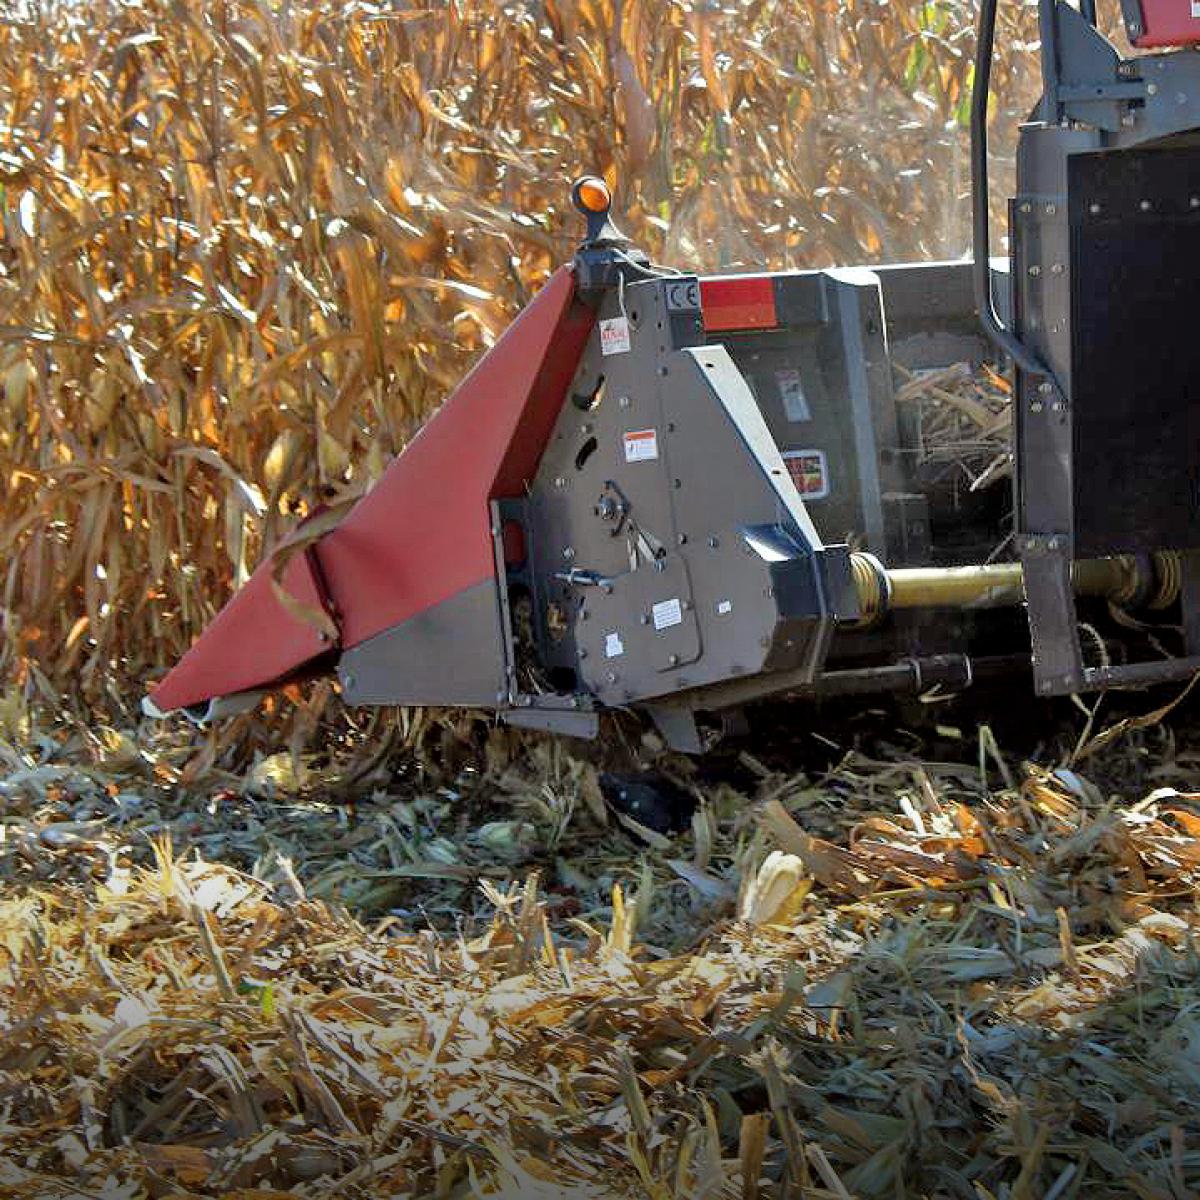 The Devastator knocks over residue for combine tires or tracks and tires on any equipment that follows.